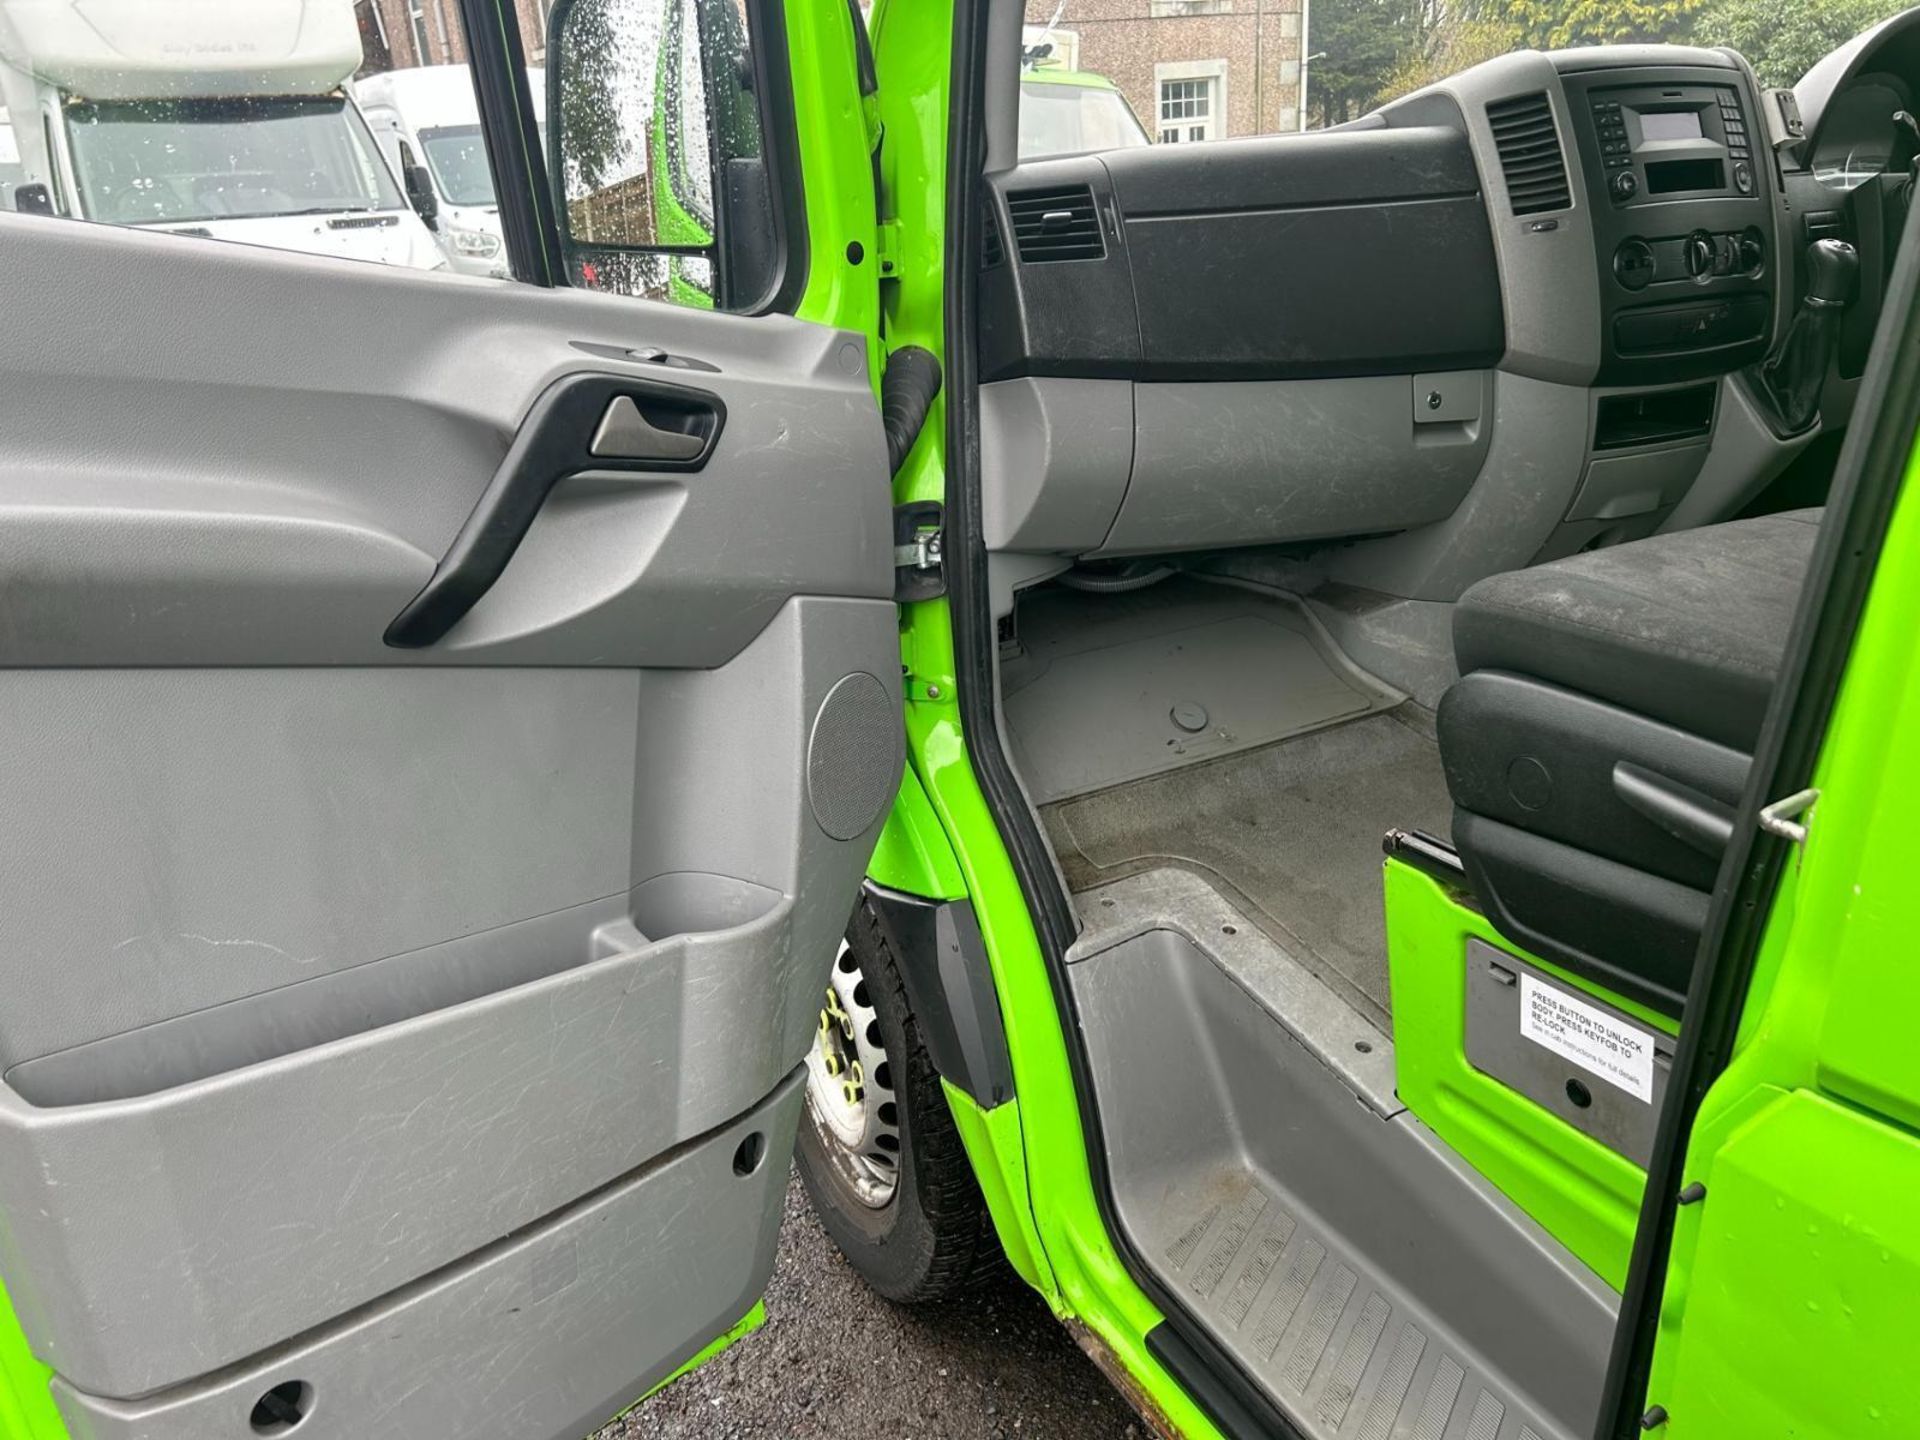 ARCTIC EXPRESS: 2018 MERCEDES SPRINTER - FRIDGE FREEZER CHASSIS CAB, READY TO ROL - Image 4 of 9